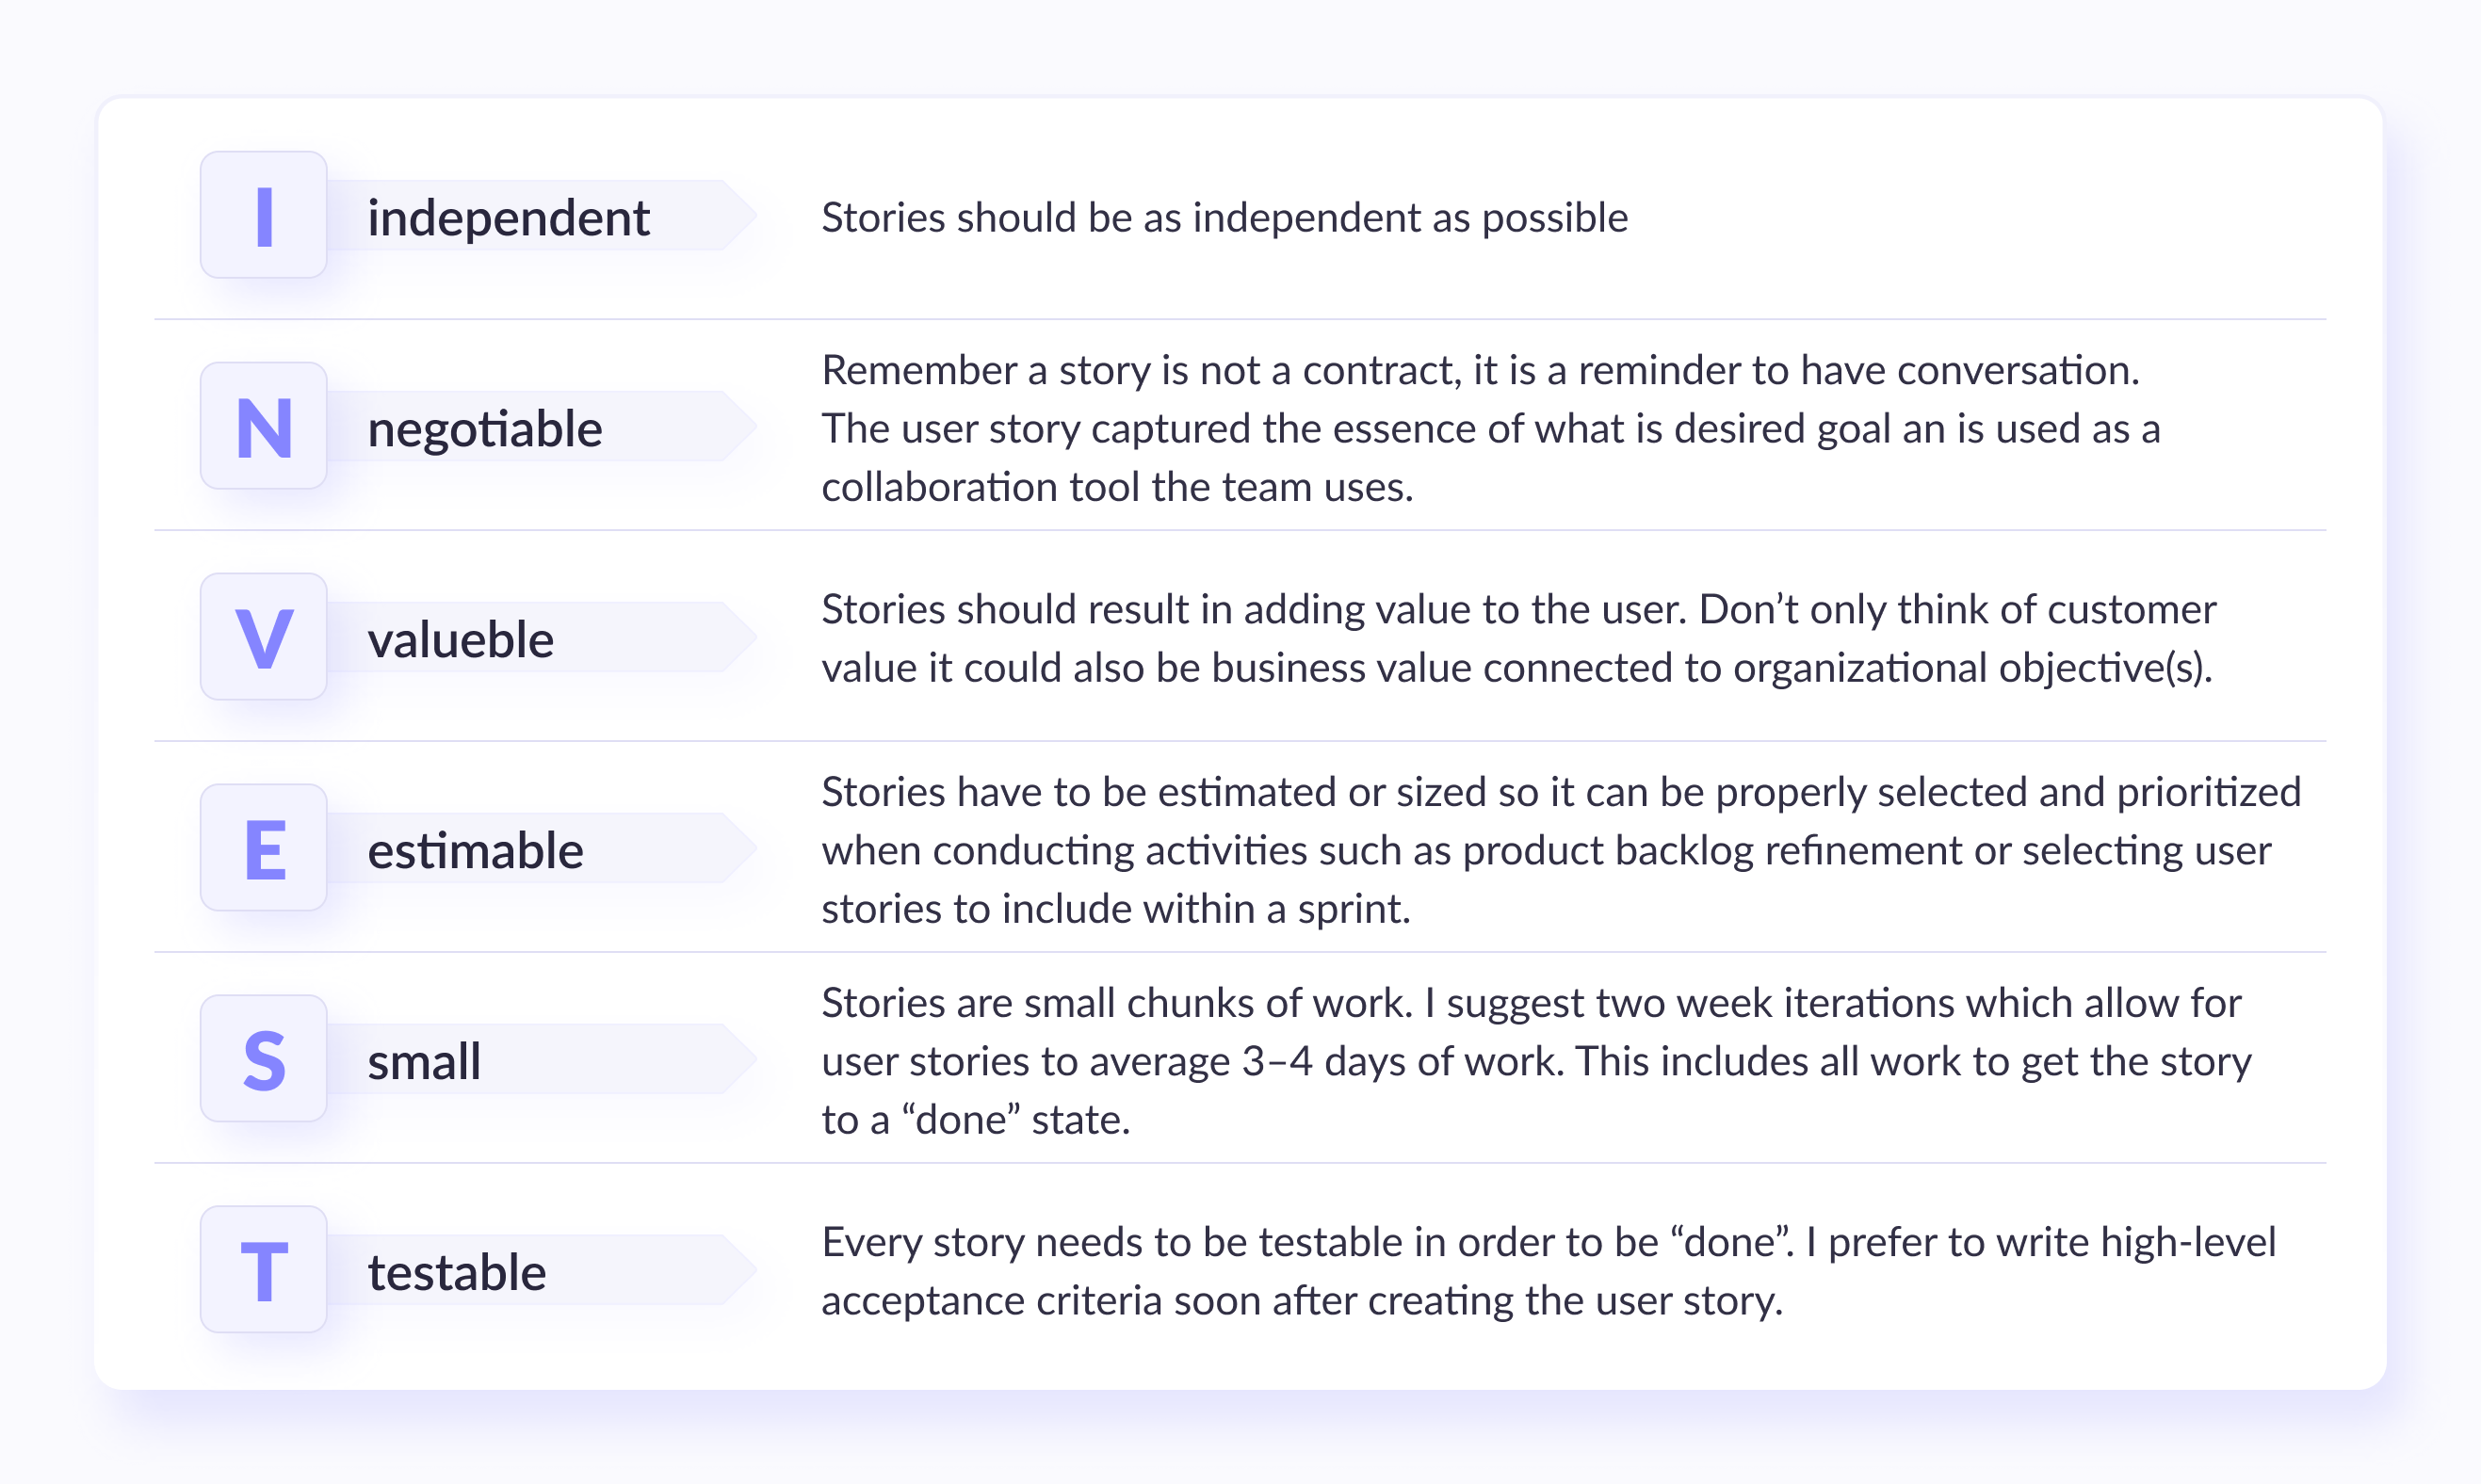 INVEST criteria for writing User Stories